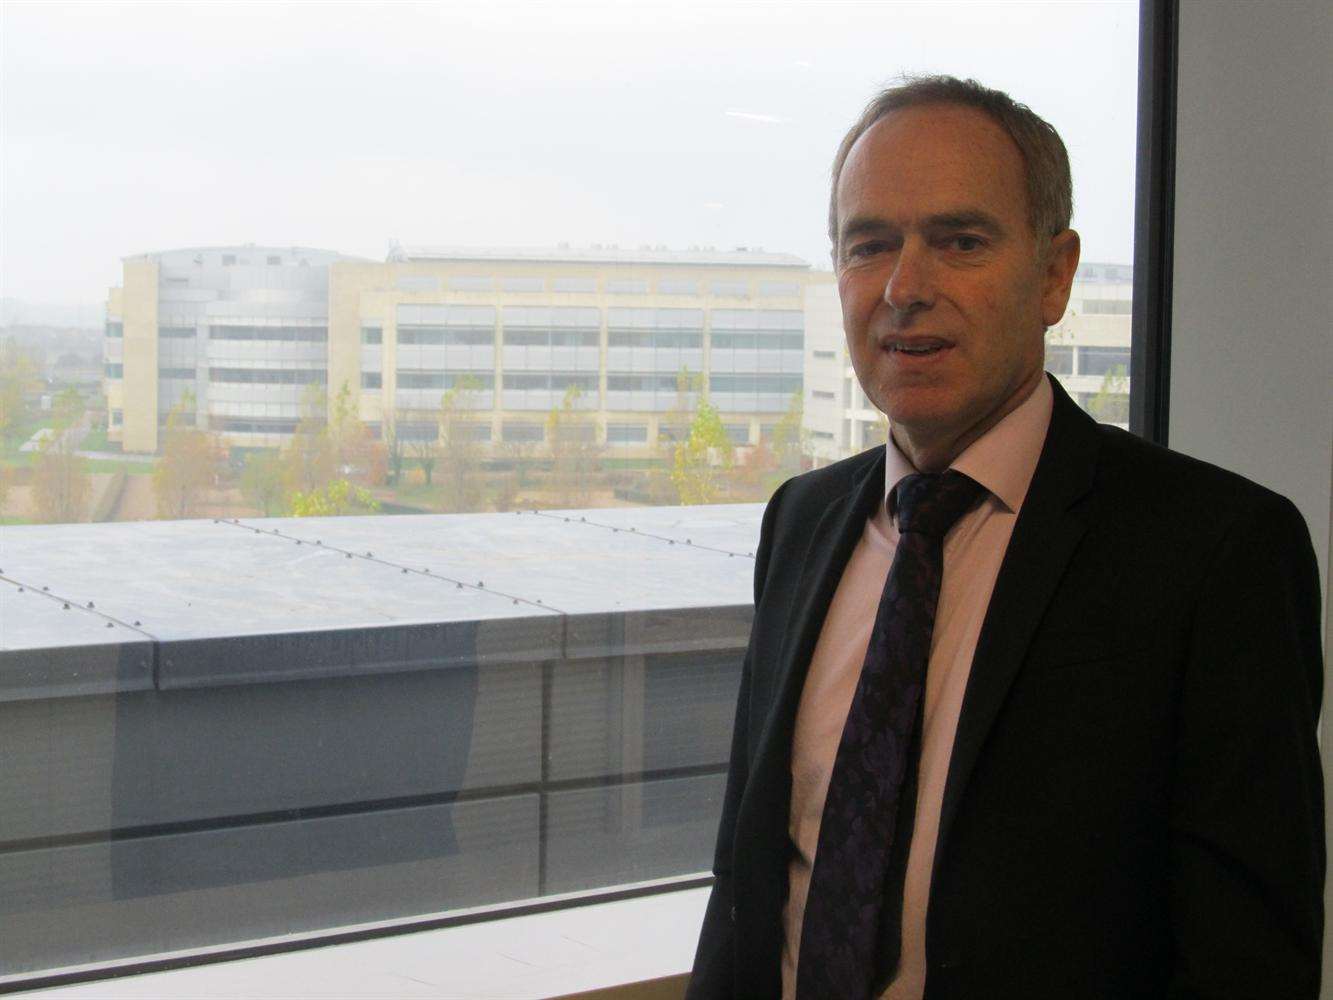 Paul Barber, managing director of Discovery Park